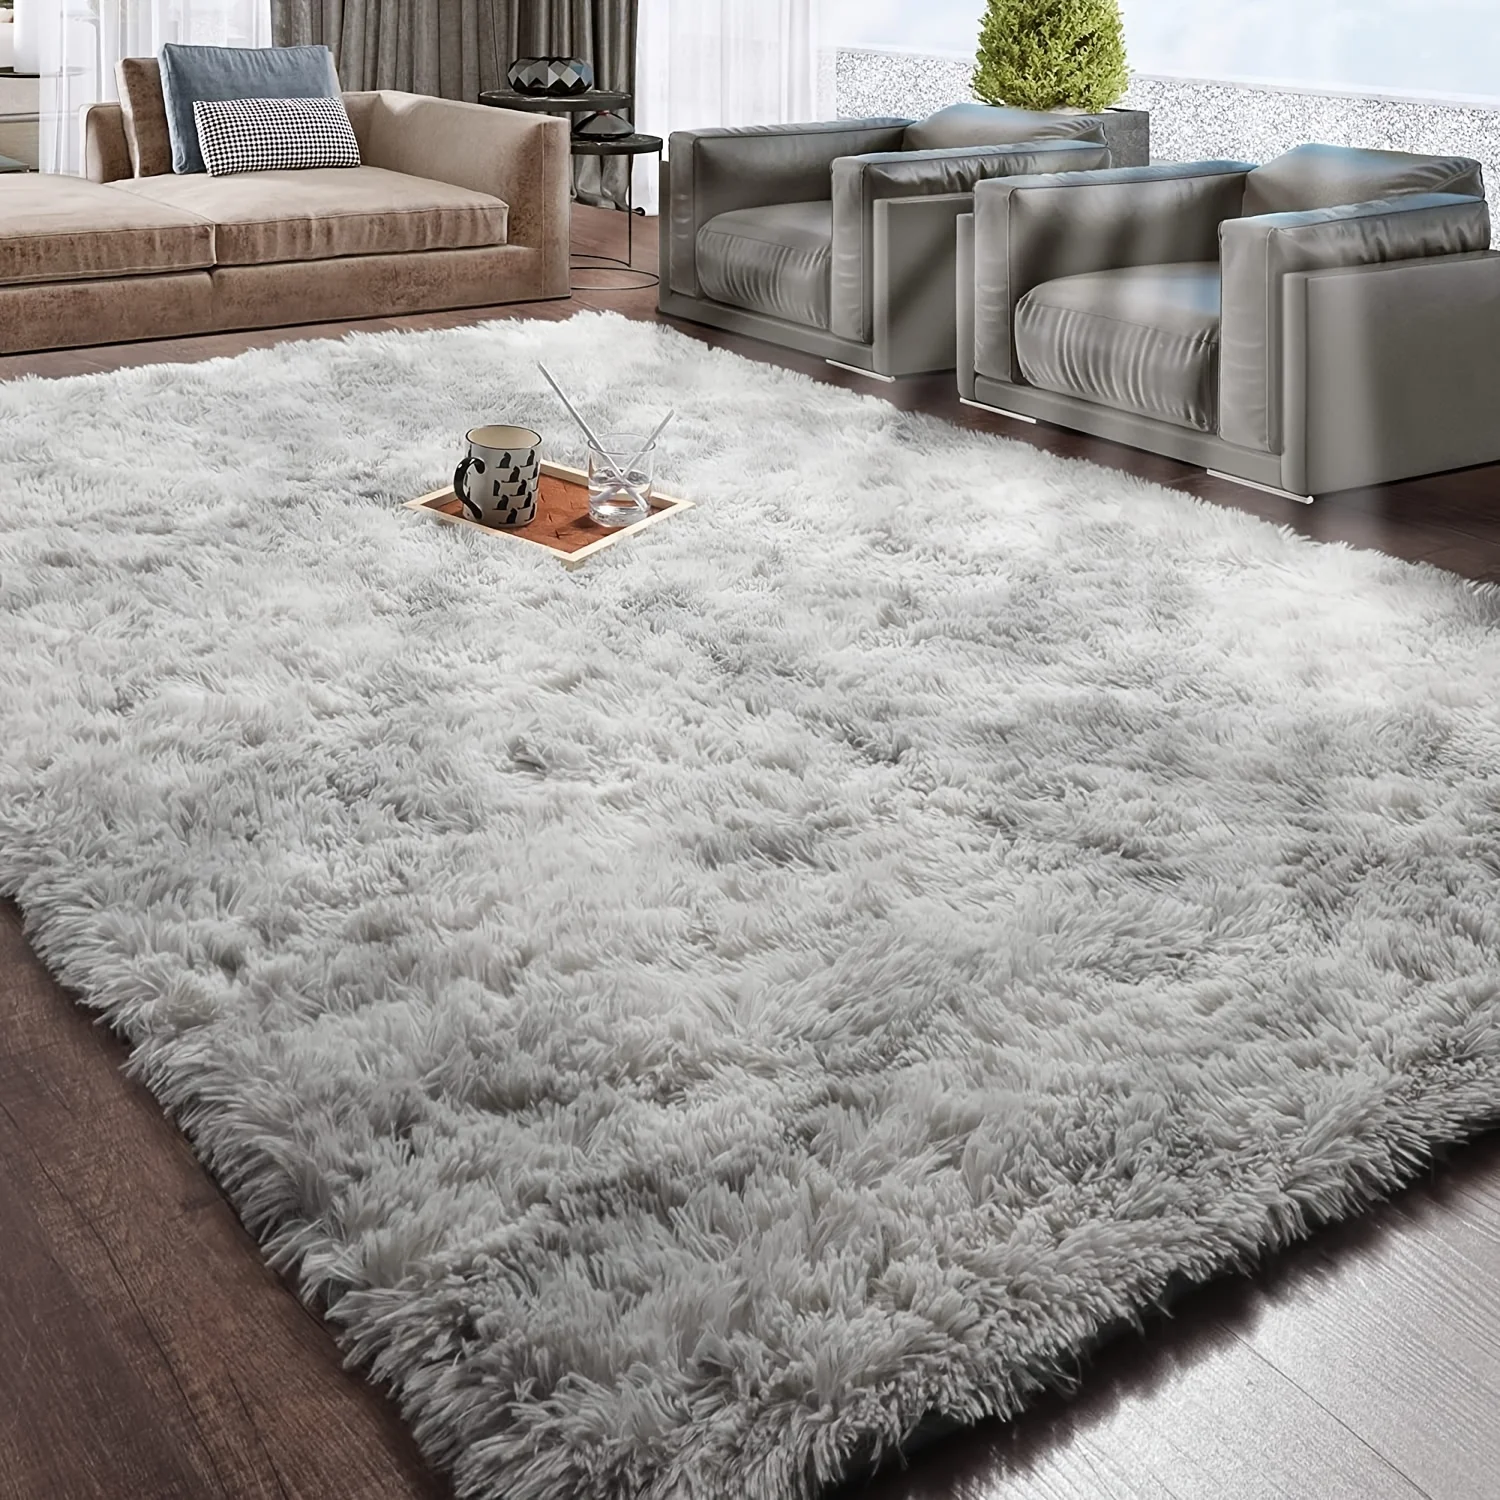 

1pc Furry Floor Mat,Modern Bedroom Area Rug Non-Slip Large Fluffy Shaggy Indoor Carpet,For Home Living Room Decor (78.7*110.2in)